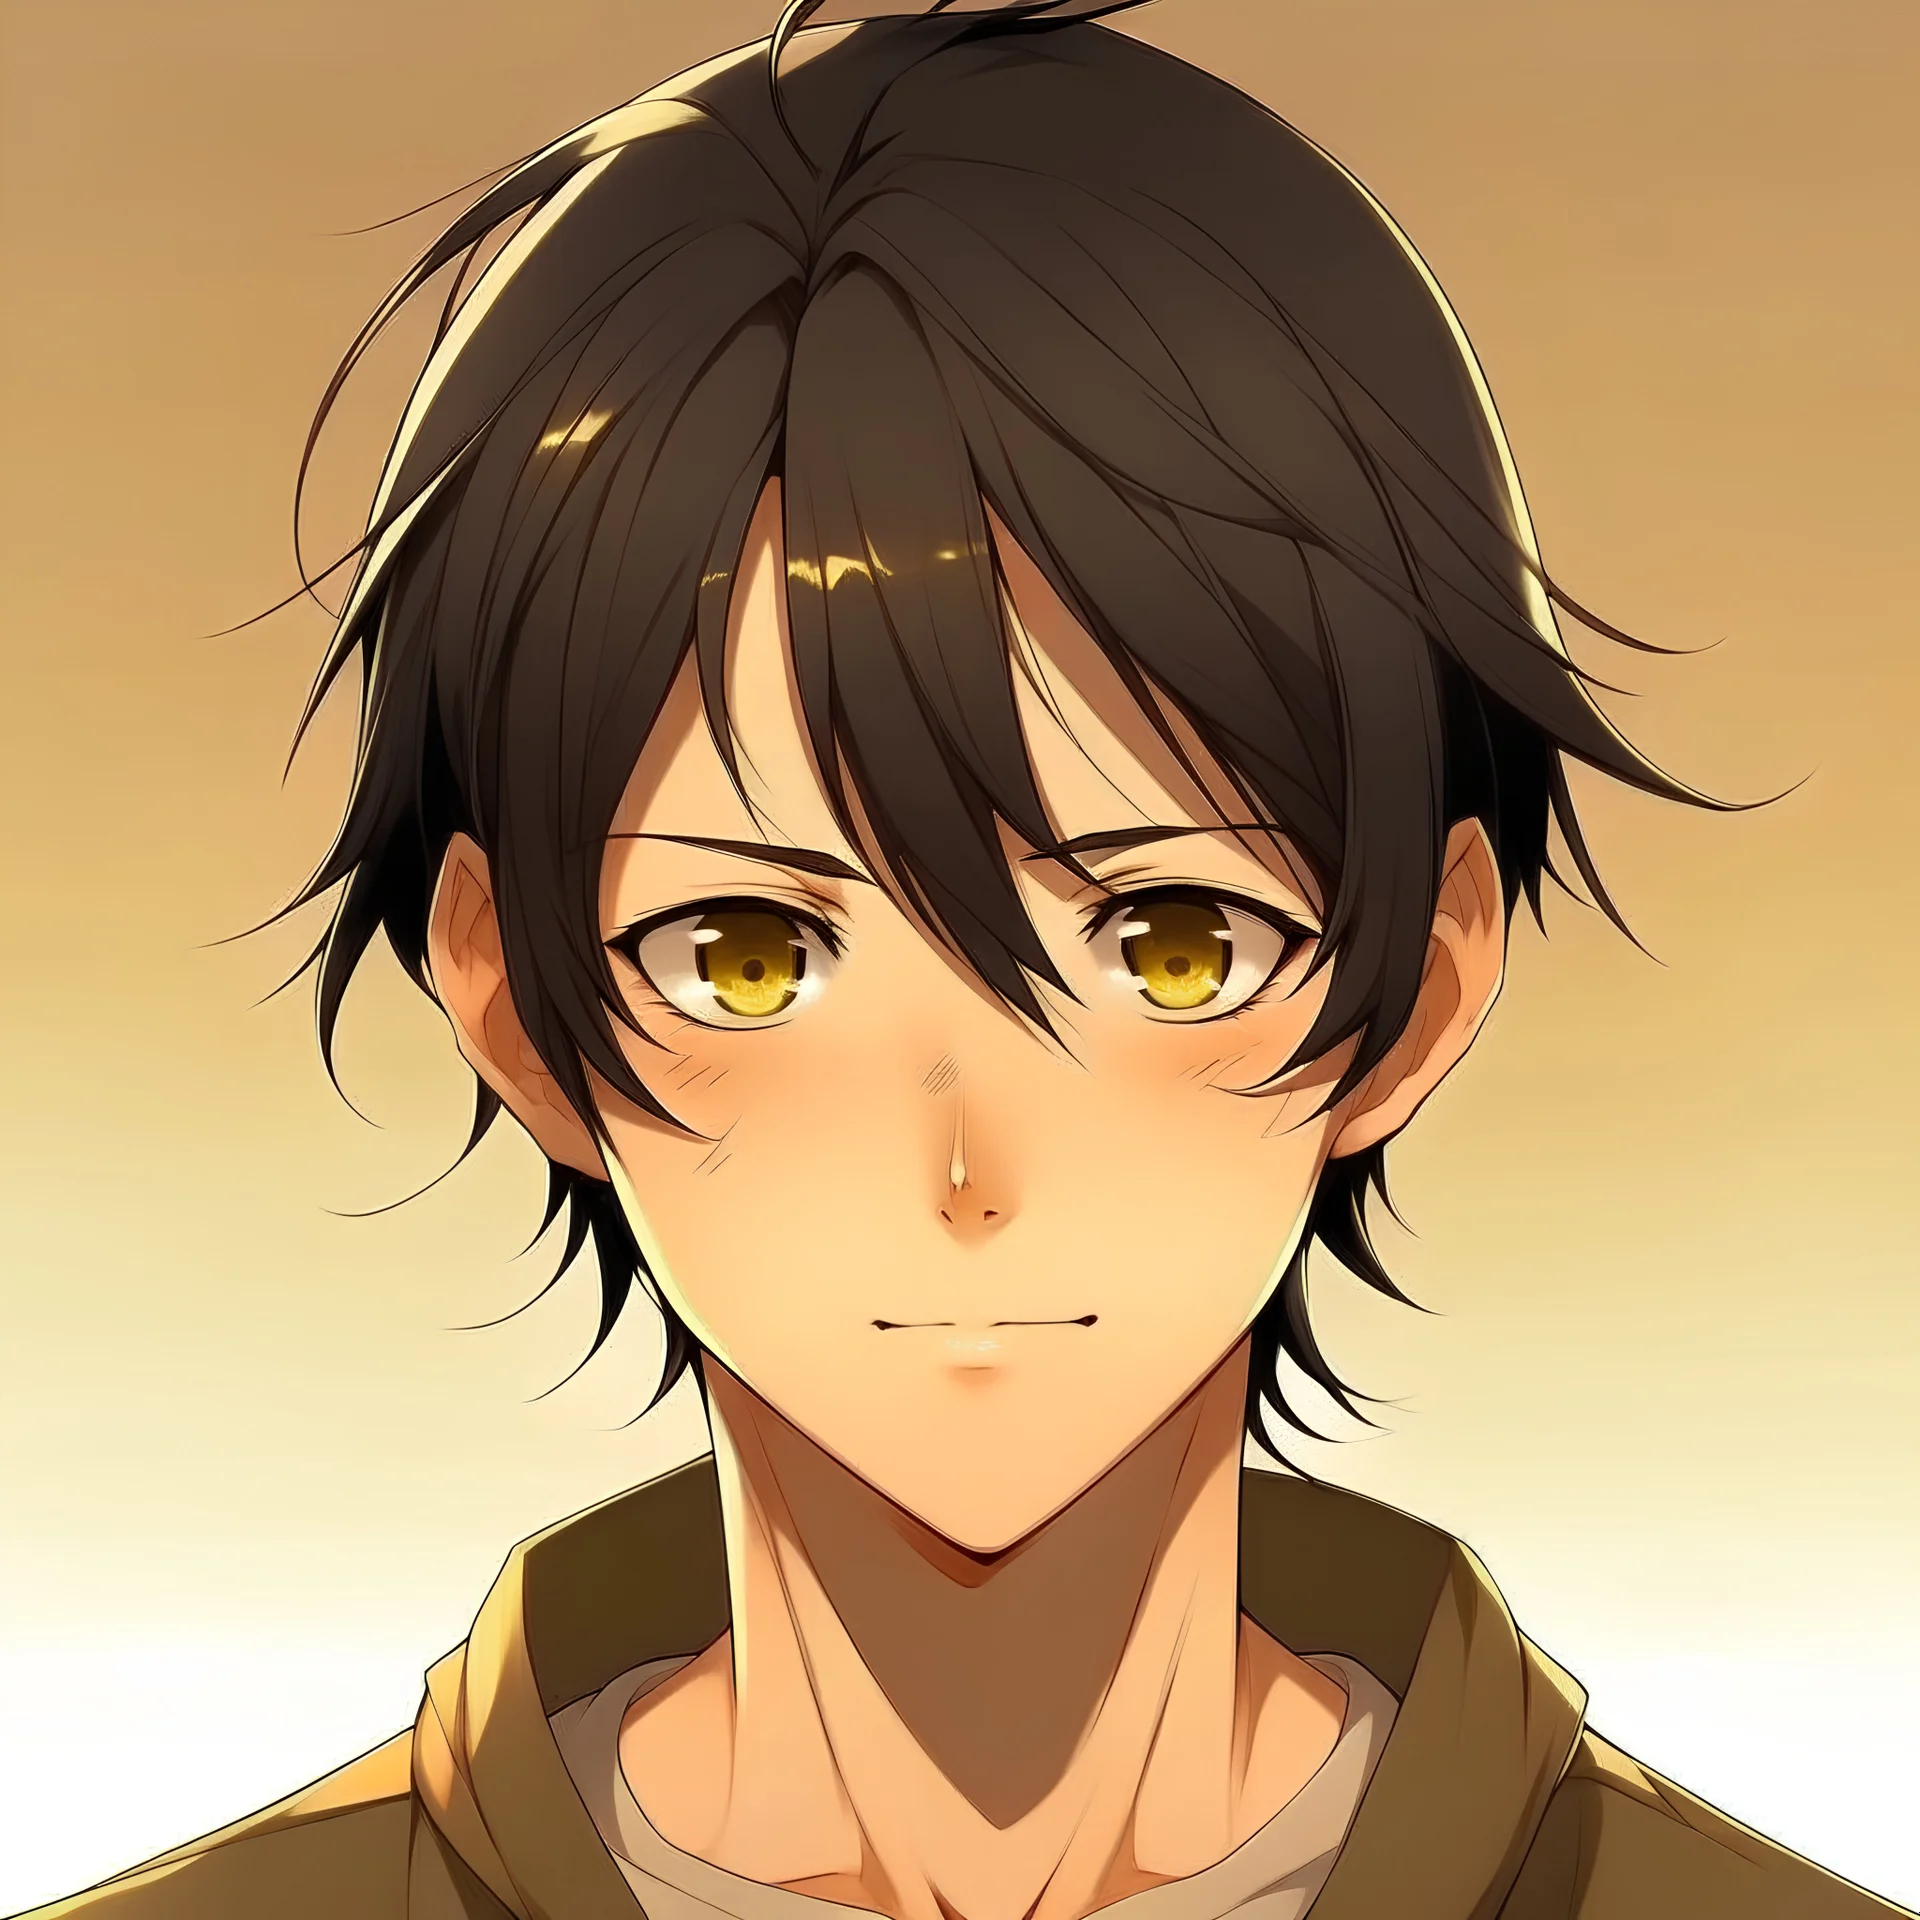 Japanese teenage boy, shoulder length black hair in a low ponytail, honey golden brown eyes, anime style, looking into camera